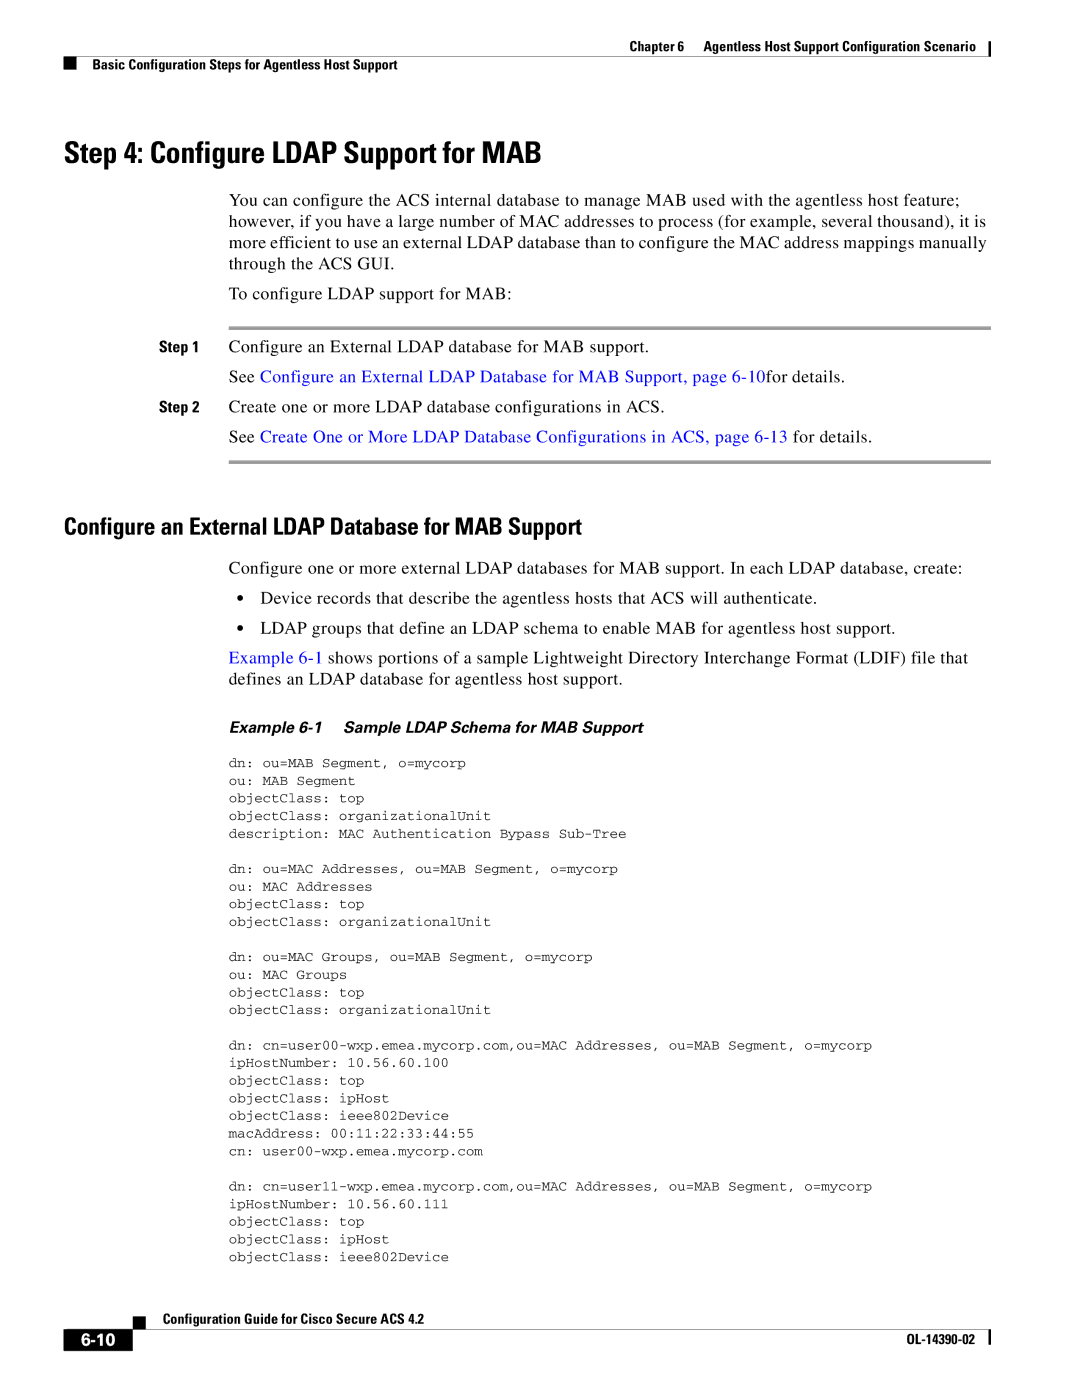 Cisco Systems 4.2 manual Configure Ldap Support for MAB, Configure an External Ldap Database for MAB Support 